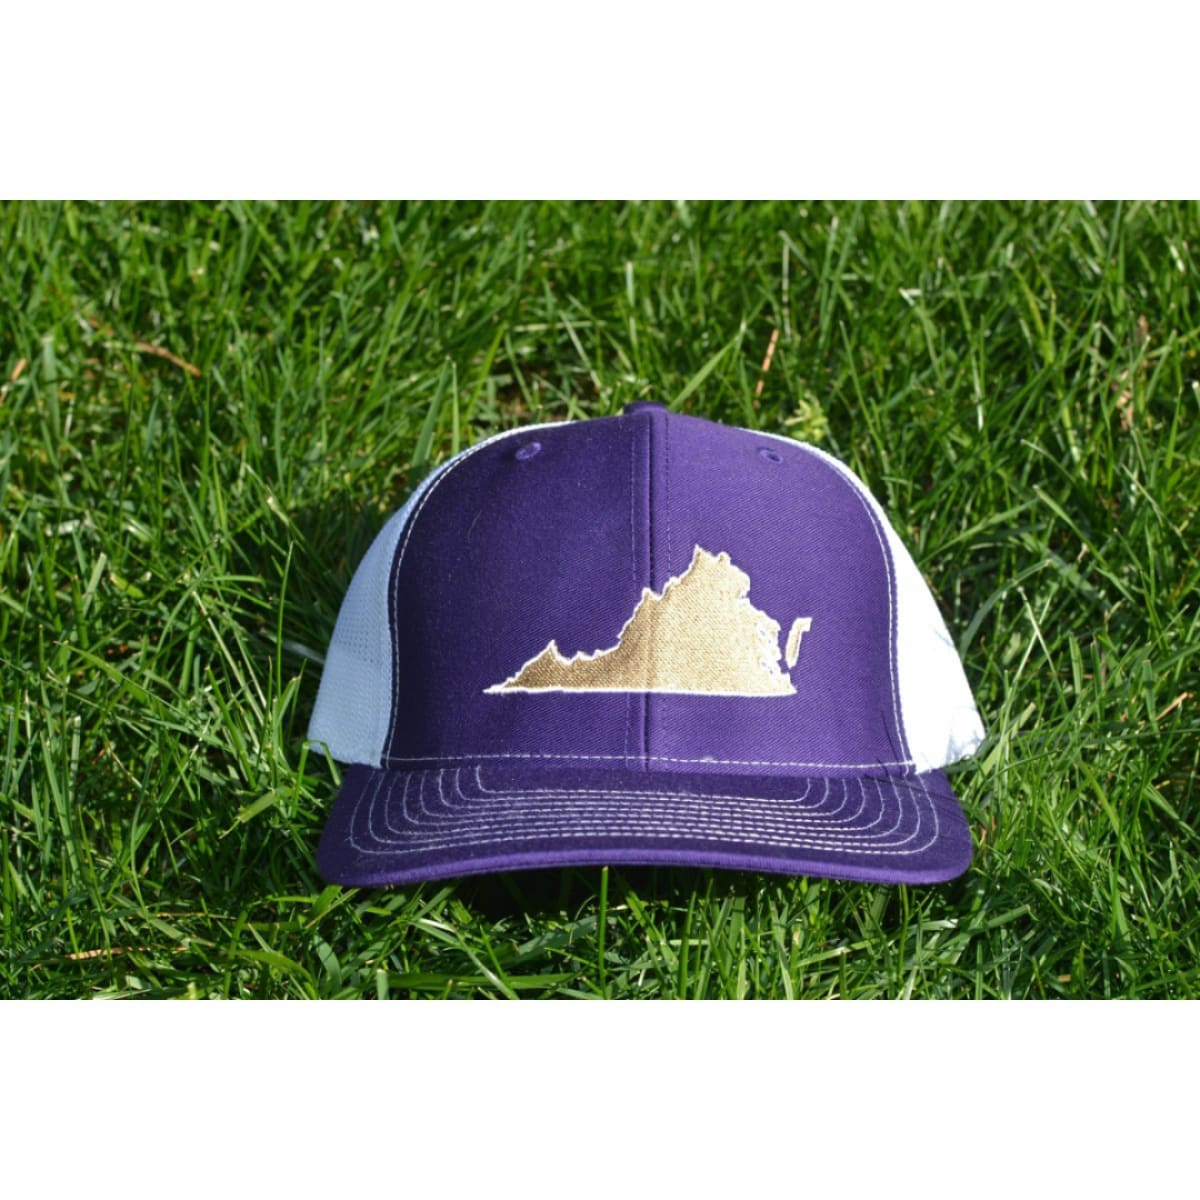 Own Your State Trucker Hat - IN STOCK - PURPLE AND WHITE